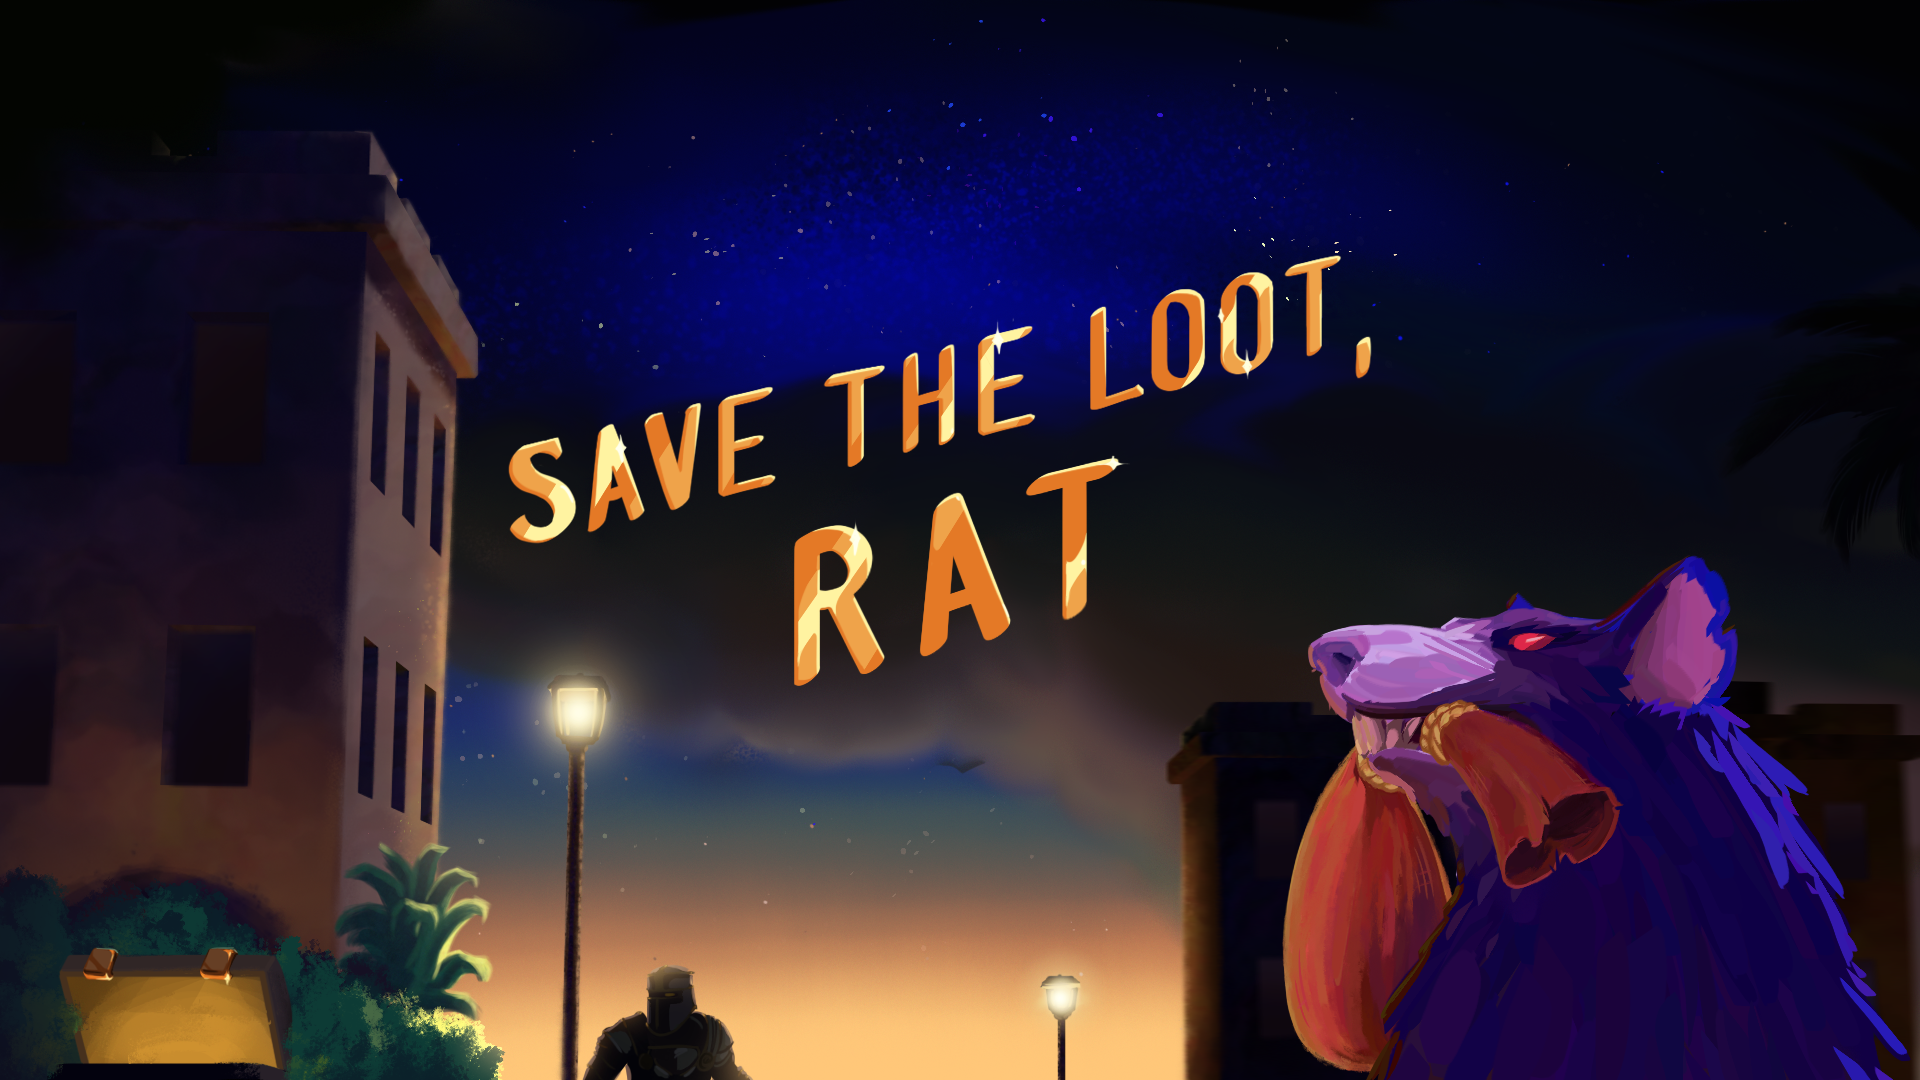 Save The Loot, Rat